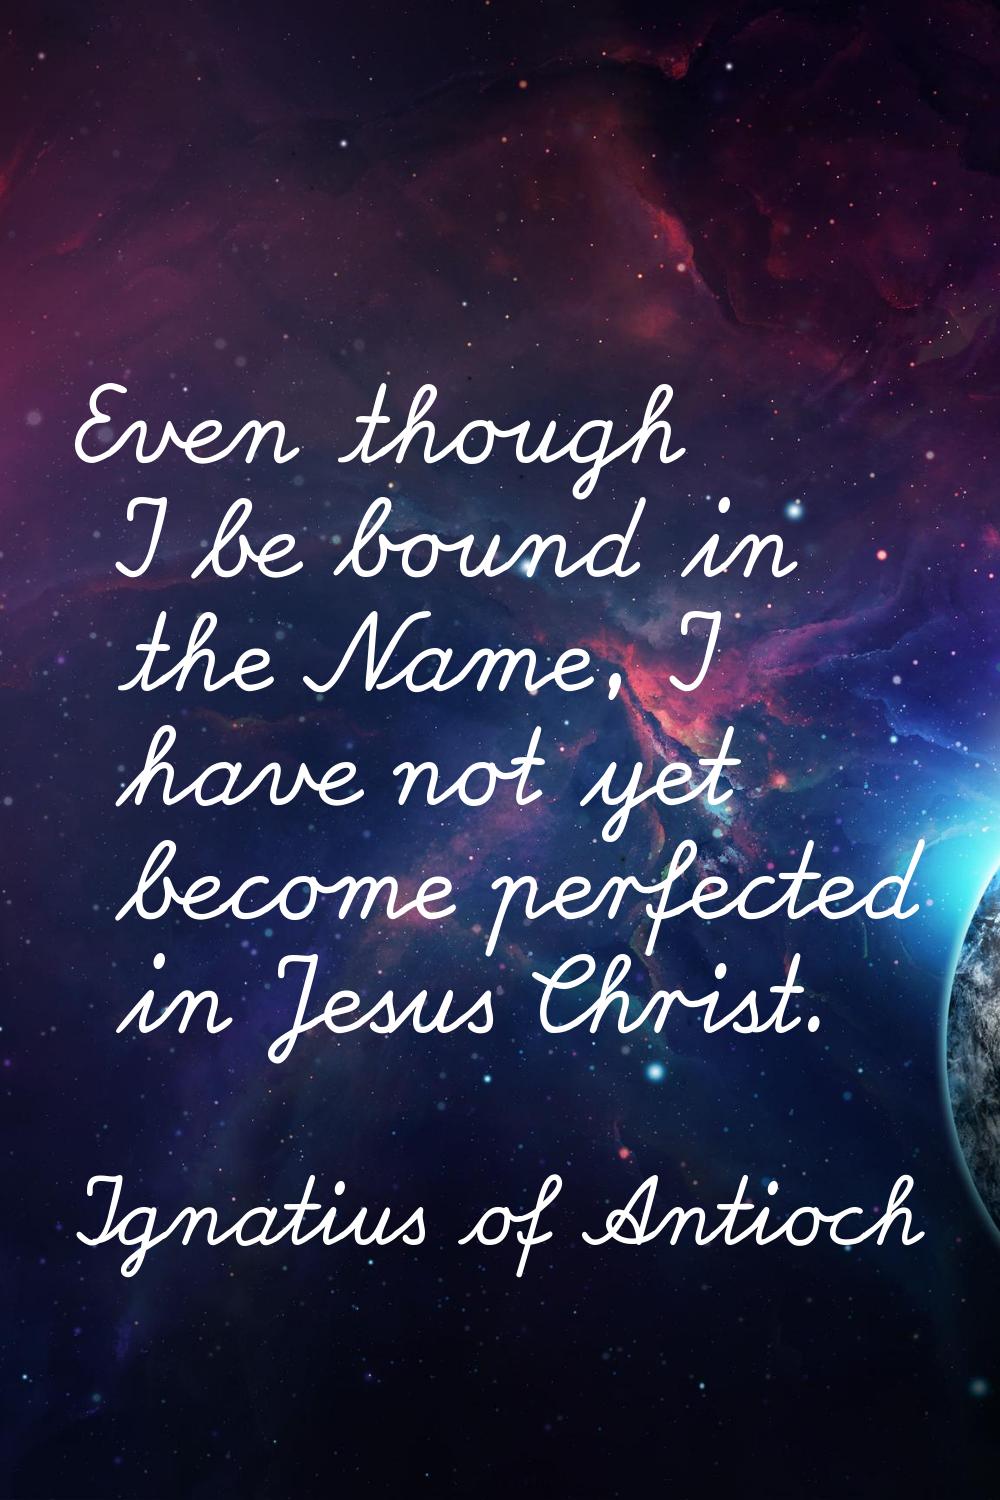 Even though I be bound in the Name, I have not yet become perfected in Jesus Christ.